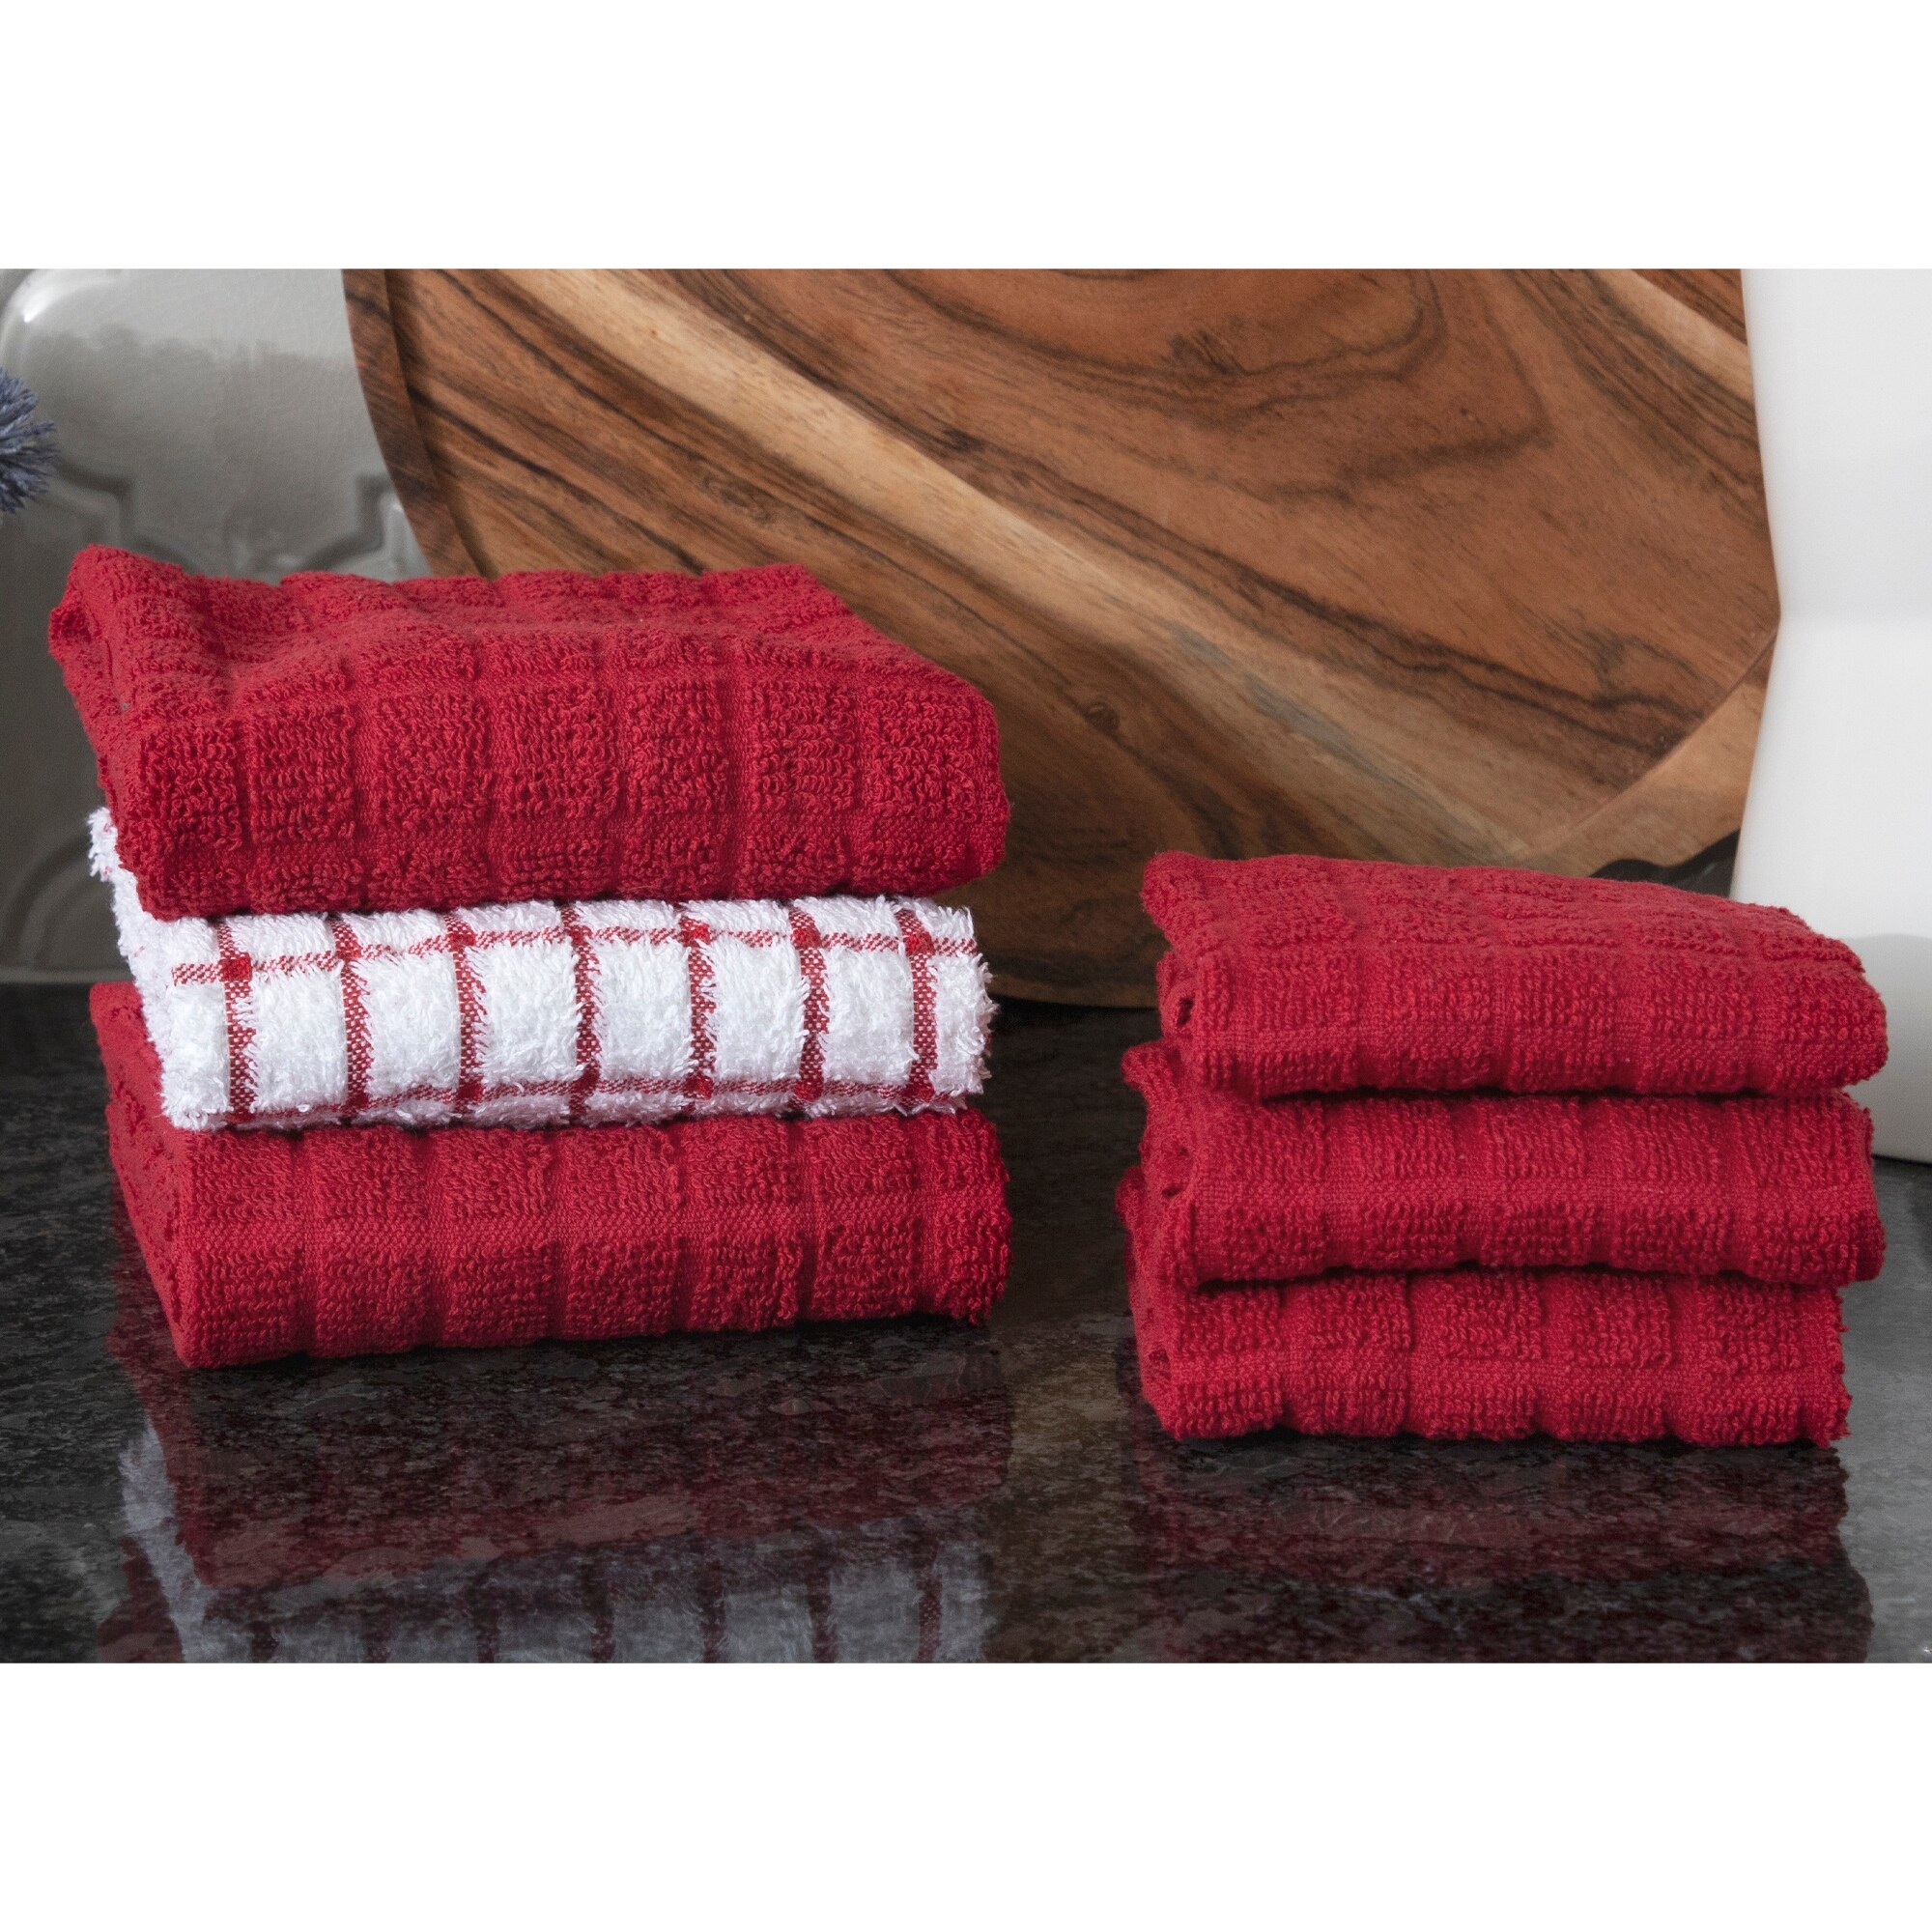 https://ak1.ostkcdn.com/images/products/is/images/direct/cc4edec234b8869a439dc89c487b816acdc41a08/RITZ-Terry-Kitchen-Towel-and-Dish-Cloth%2C-Set-of-3-Towels-and-3-Dish-Cloths.jpg